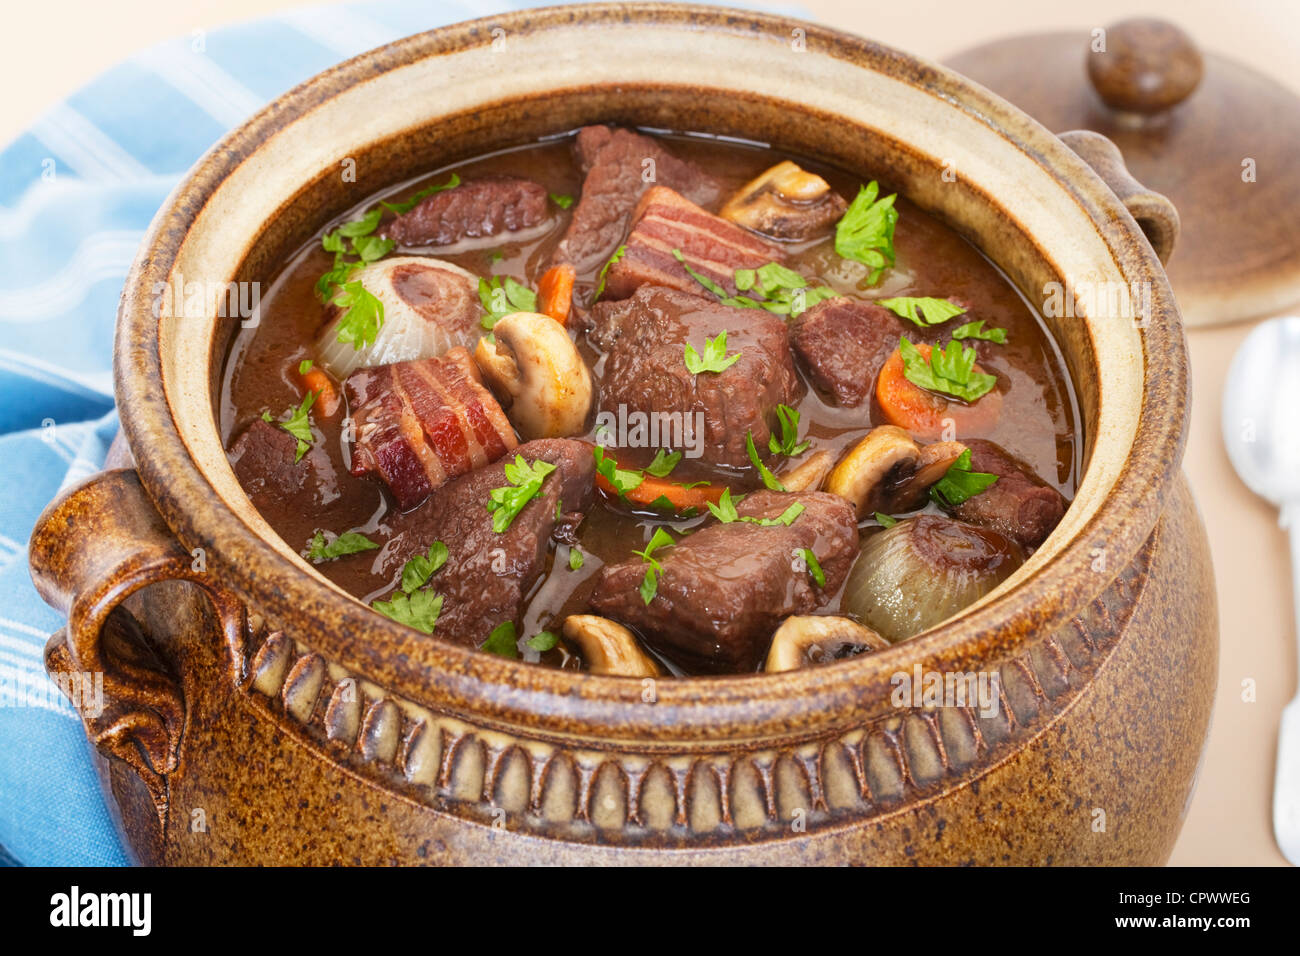 Classic beef bourguignon in a traditional brown pot. Stock Photo